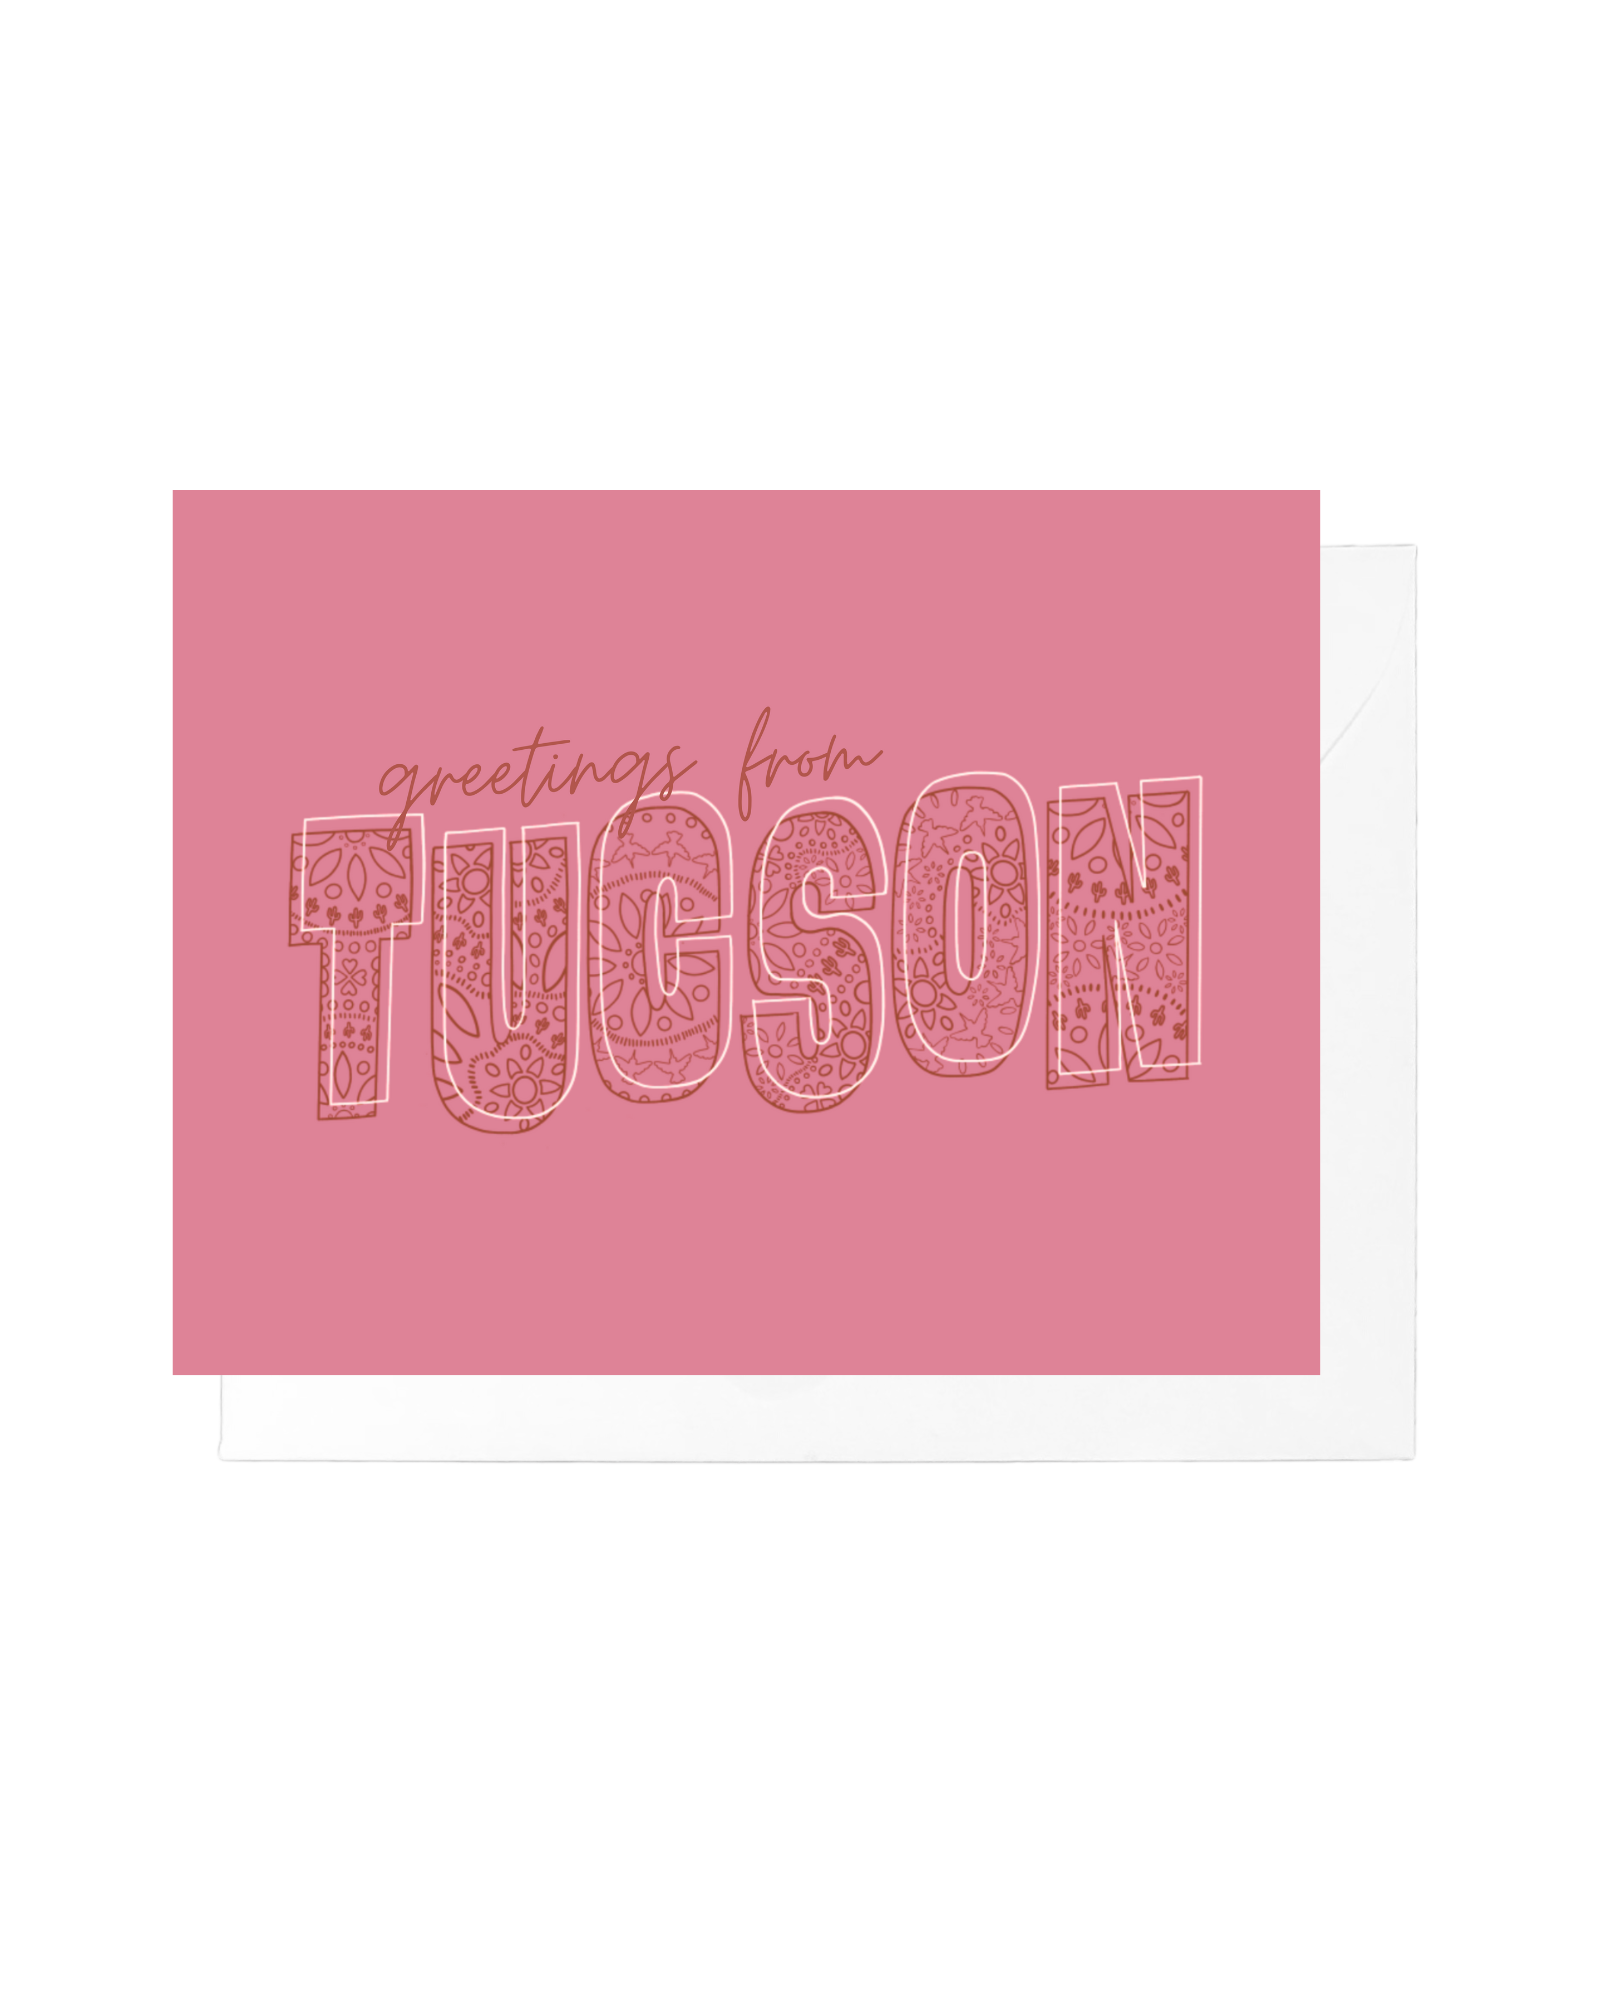 Greetings from Tucson Papel Picado Greeting Card